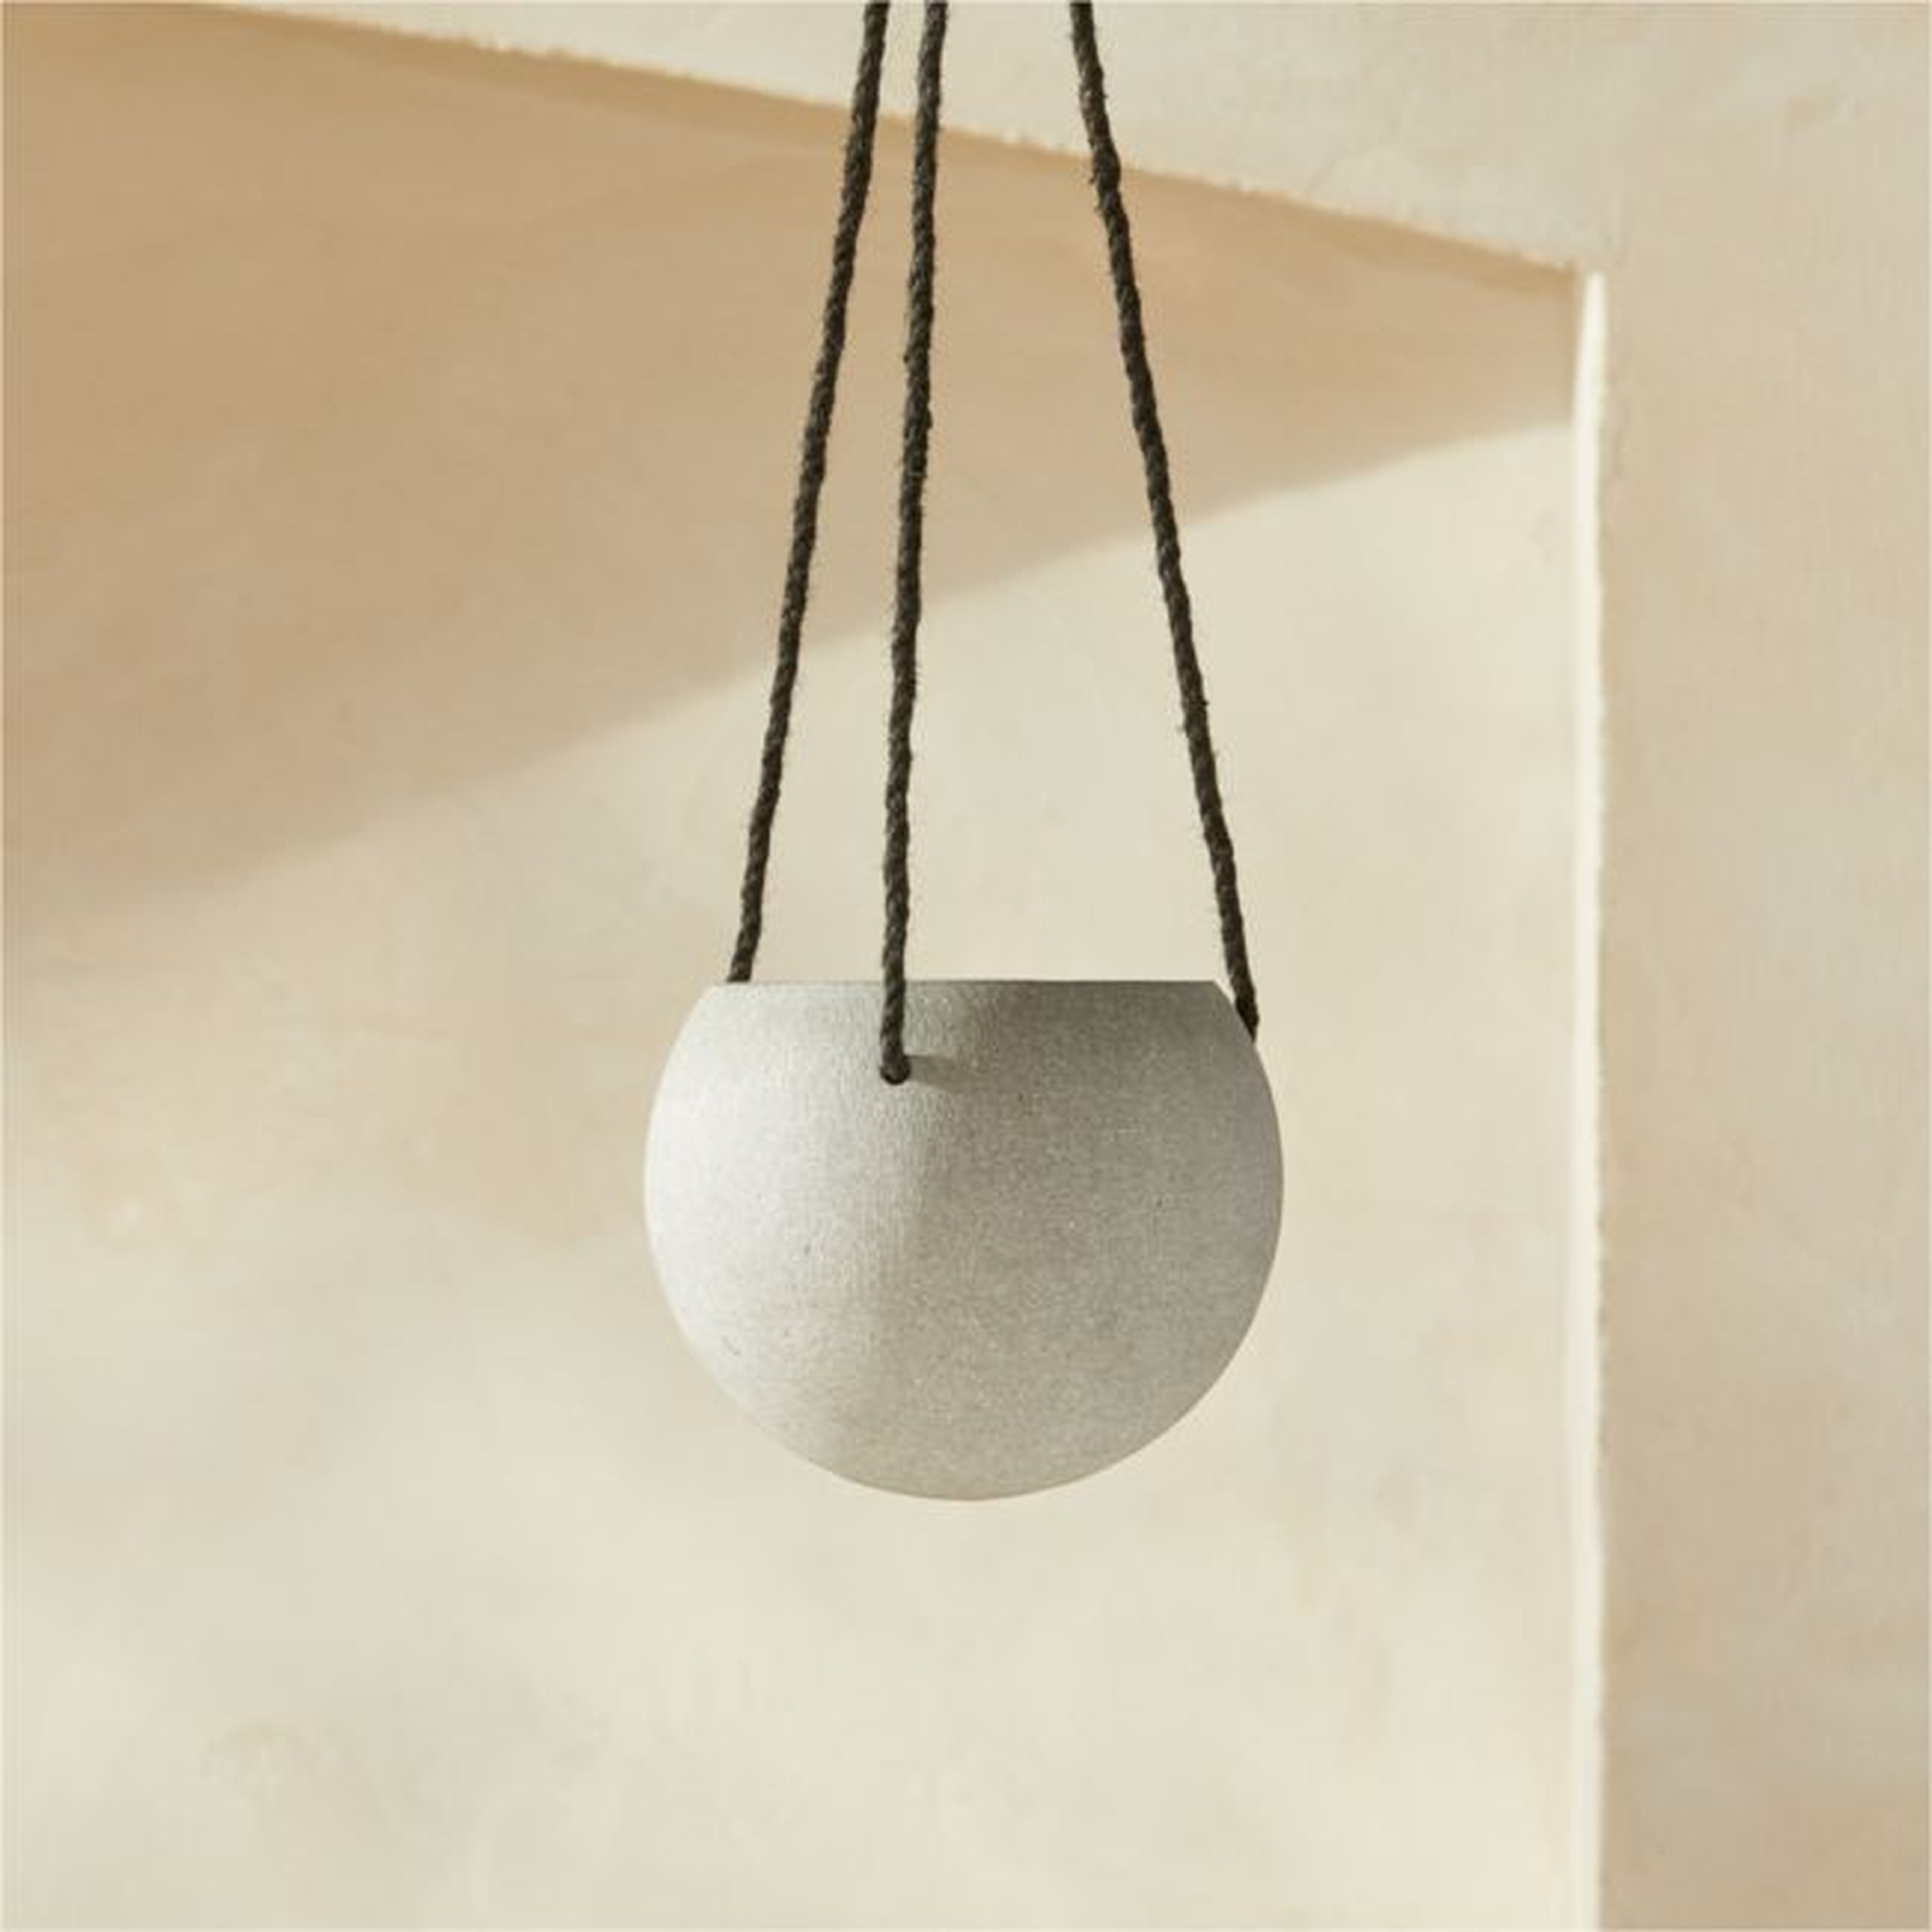 Orb Hanging Planter, White, Small - CB2